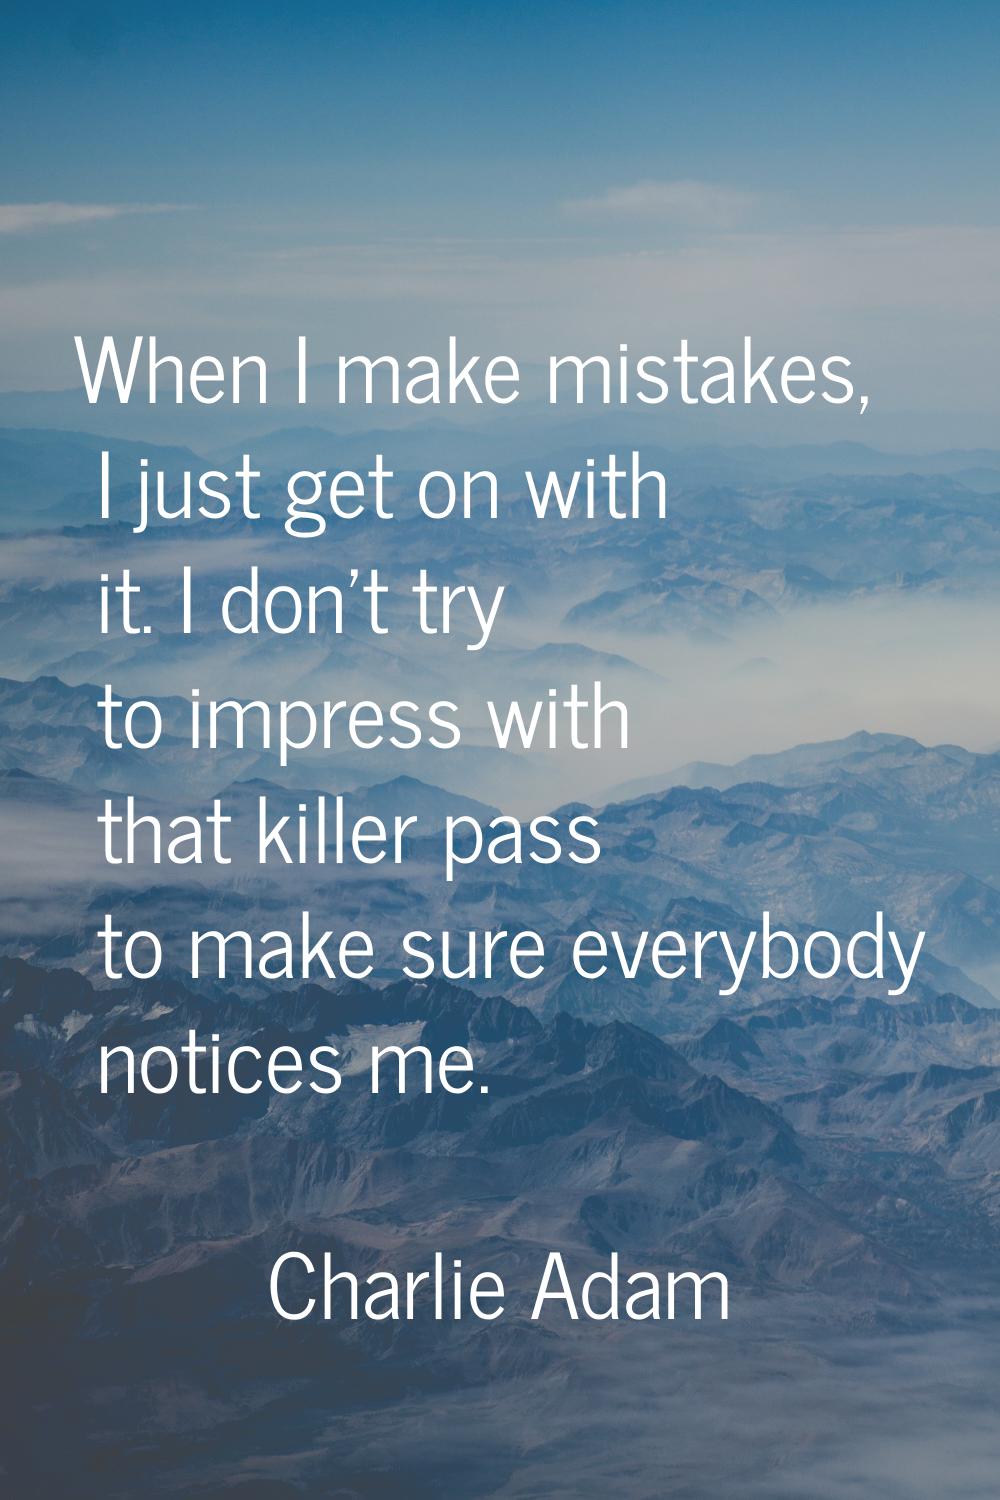 When I make mistakes, I just get on with it. I don't try to impress with that killer pass to make s